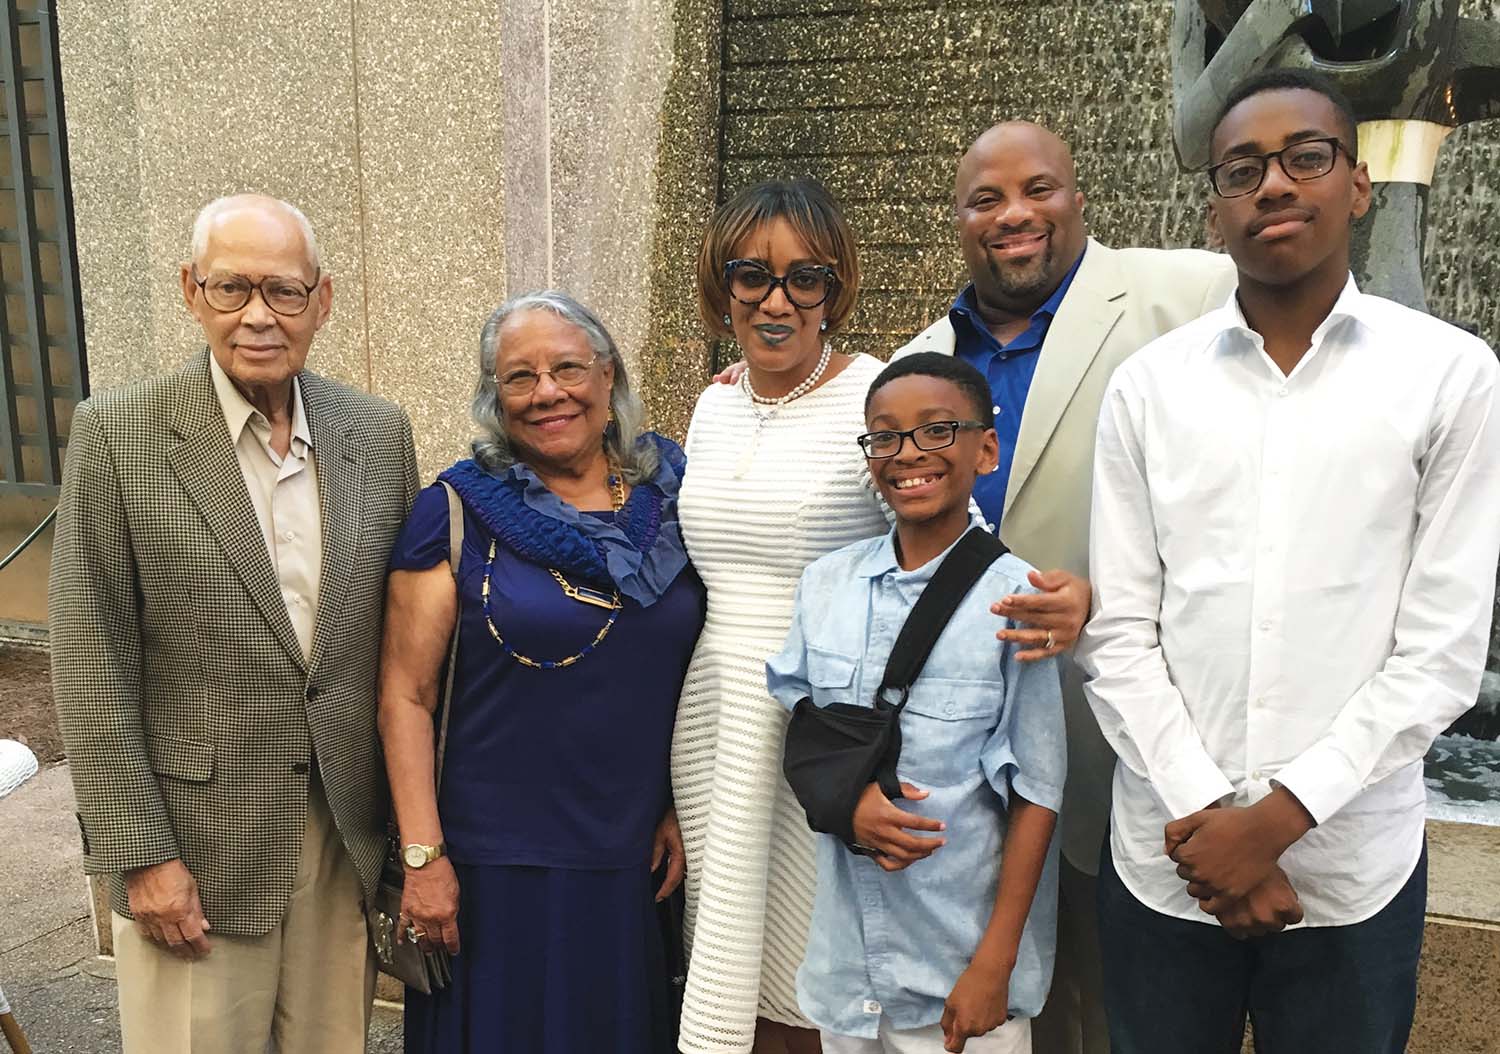 Mausi started the Dome Group, LLC, with his wife, Lesleigh, a former teacher and secondary school administrator, in 2009. (Pictured left to right) Grandparents Wanda and Nathan Garrett, Sr. wife Lesleigh Mausi, son Ahmad, Sulaiman Mausi and son Sulaiman Jr. Inset: Mausi celebrating his graduation day with his great grandfather, Dr. York D. Garrett. 